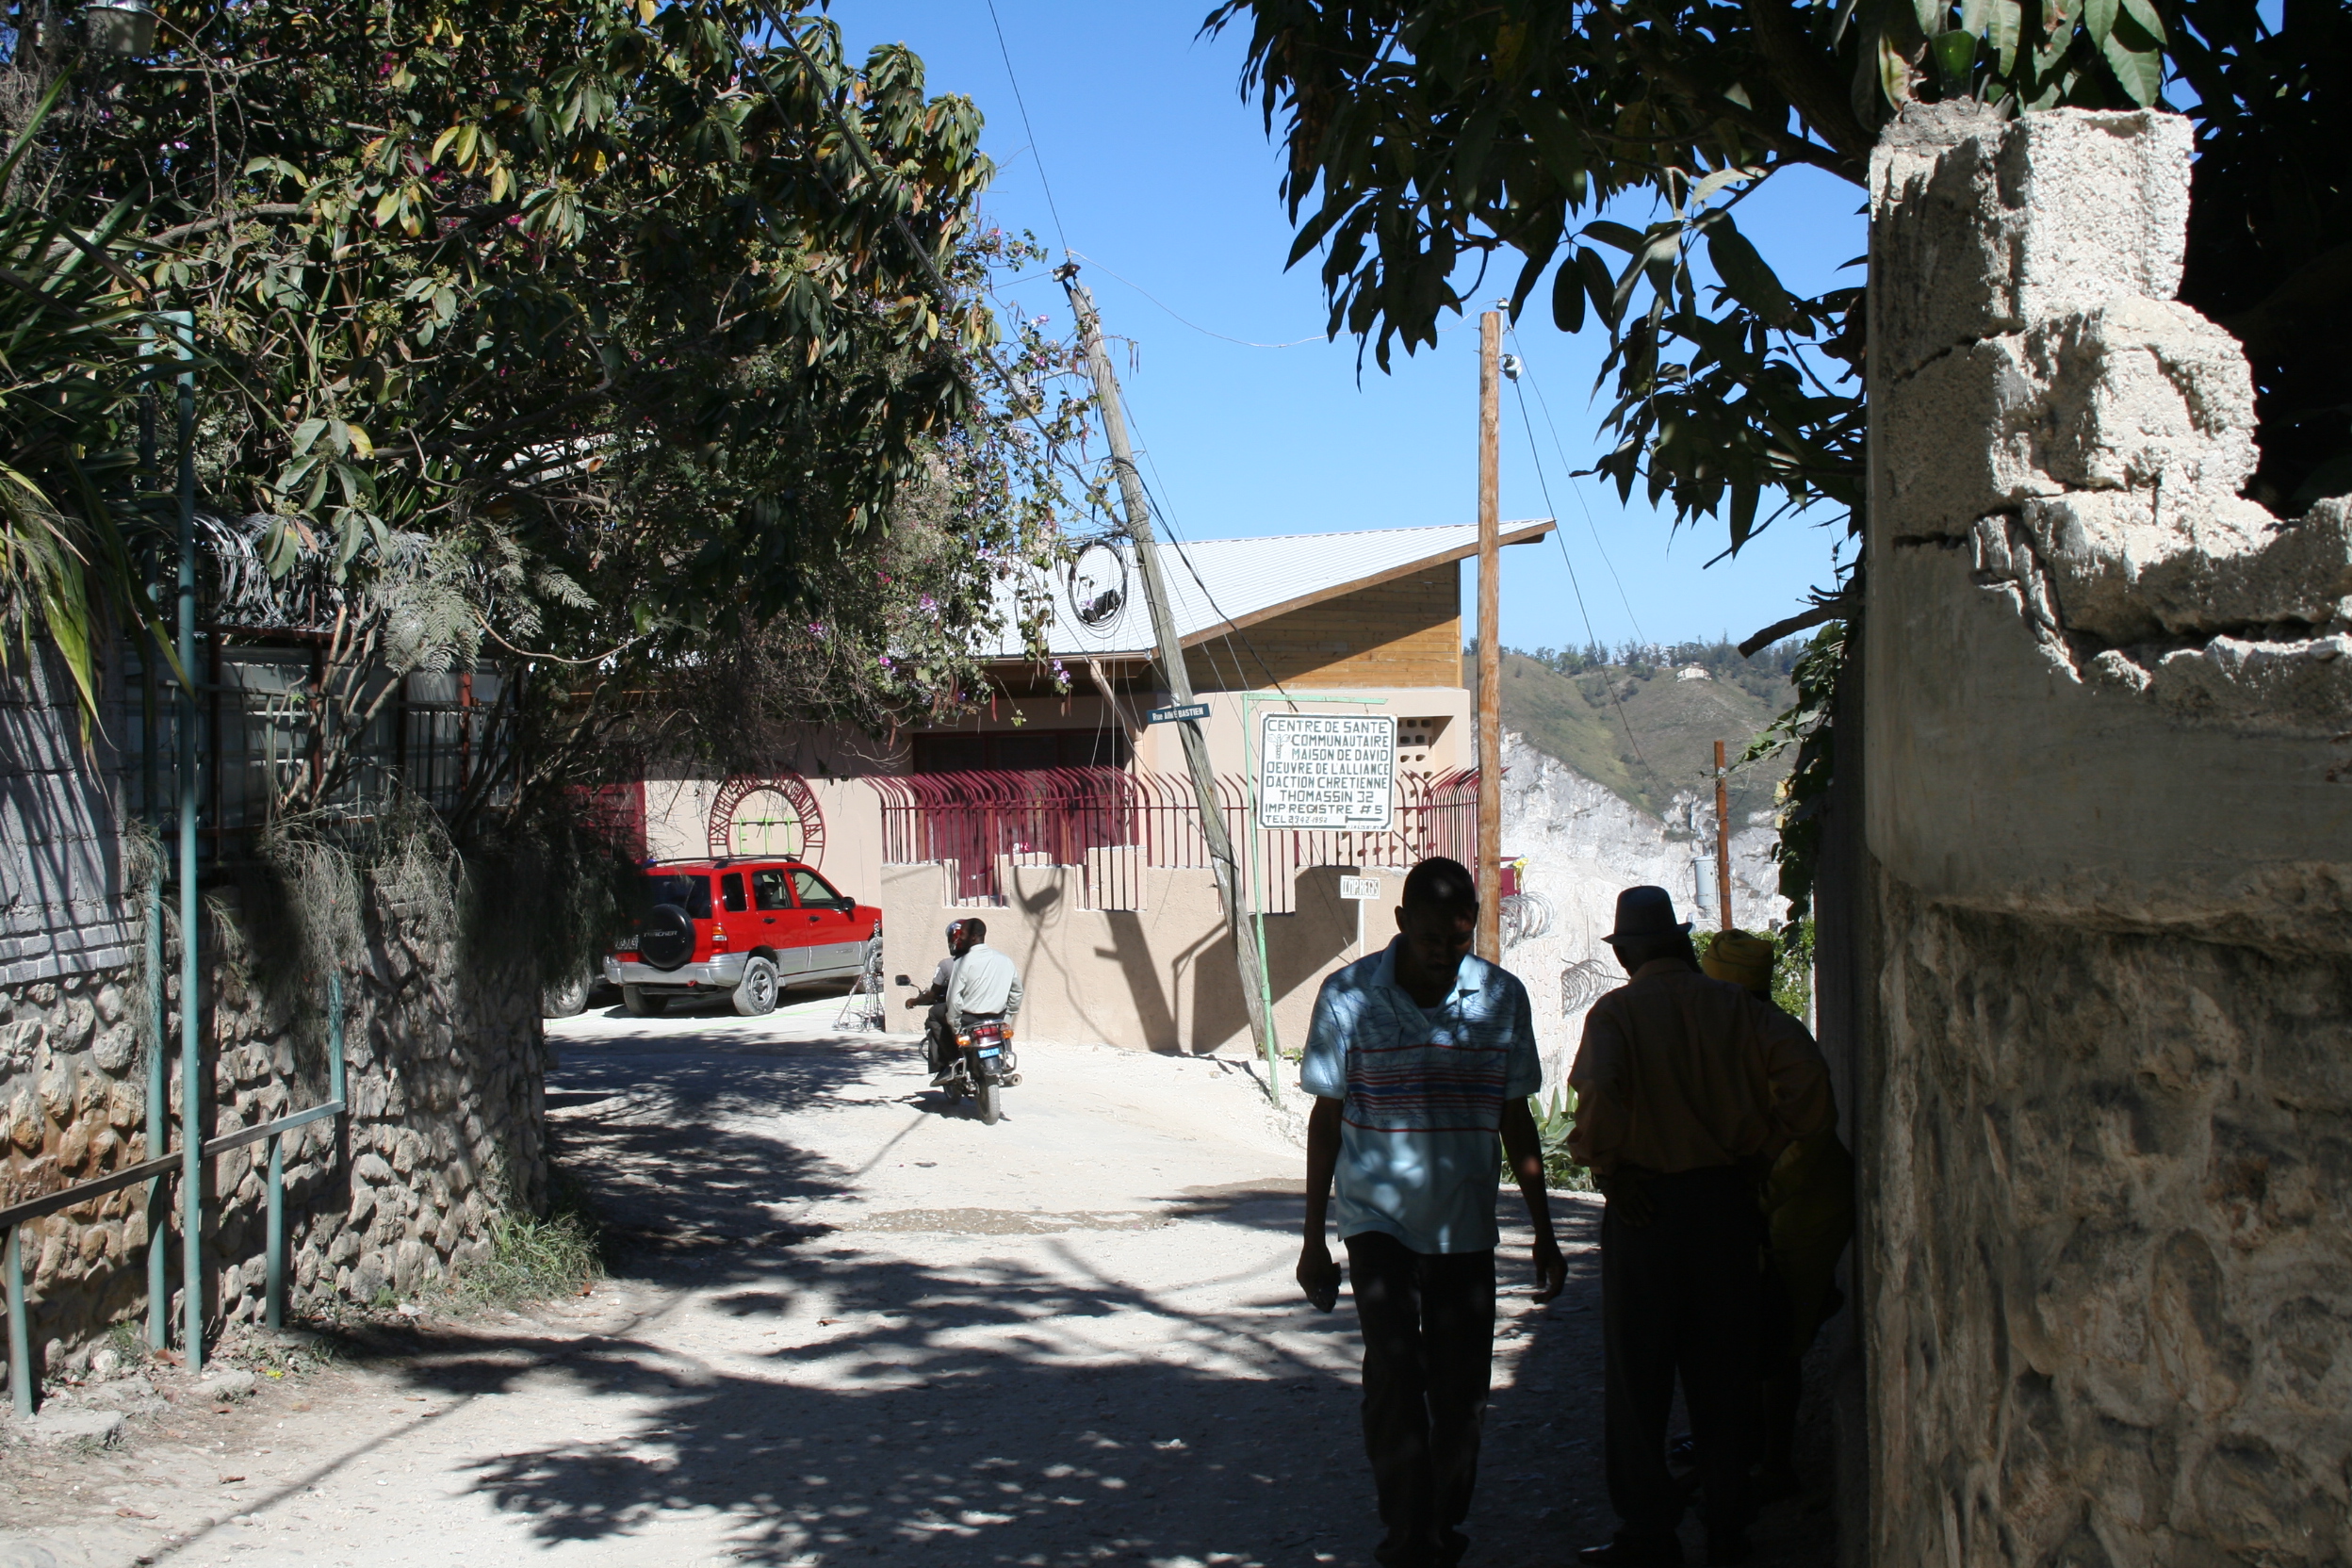 The facility is situated on a ridgetop above Port-au-Prince and accessed through narrow winding lanes.